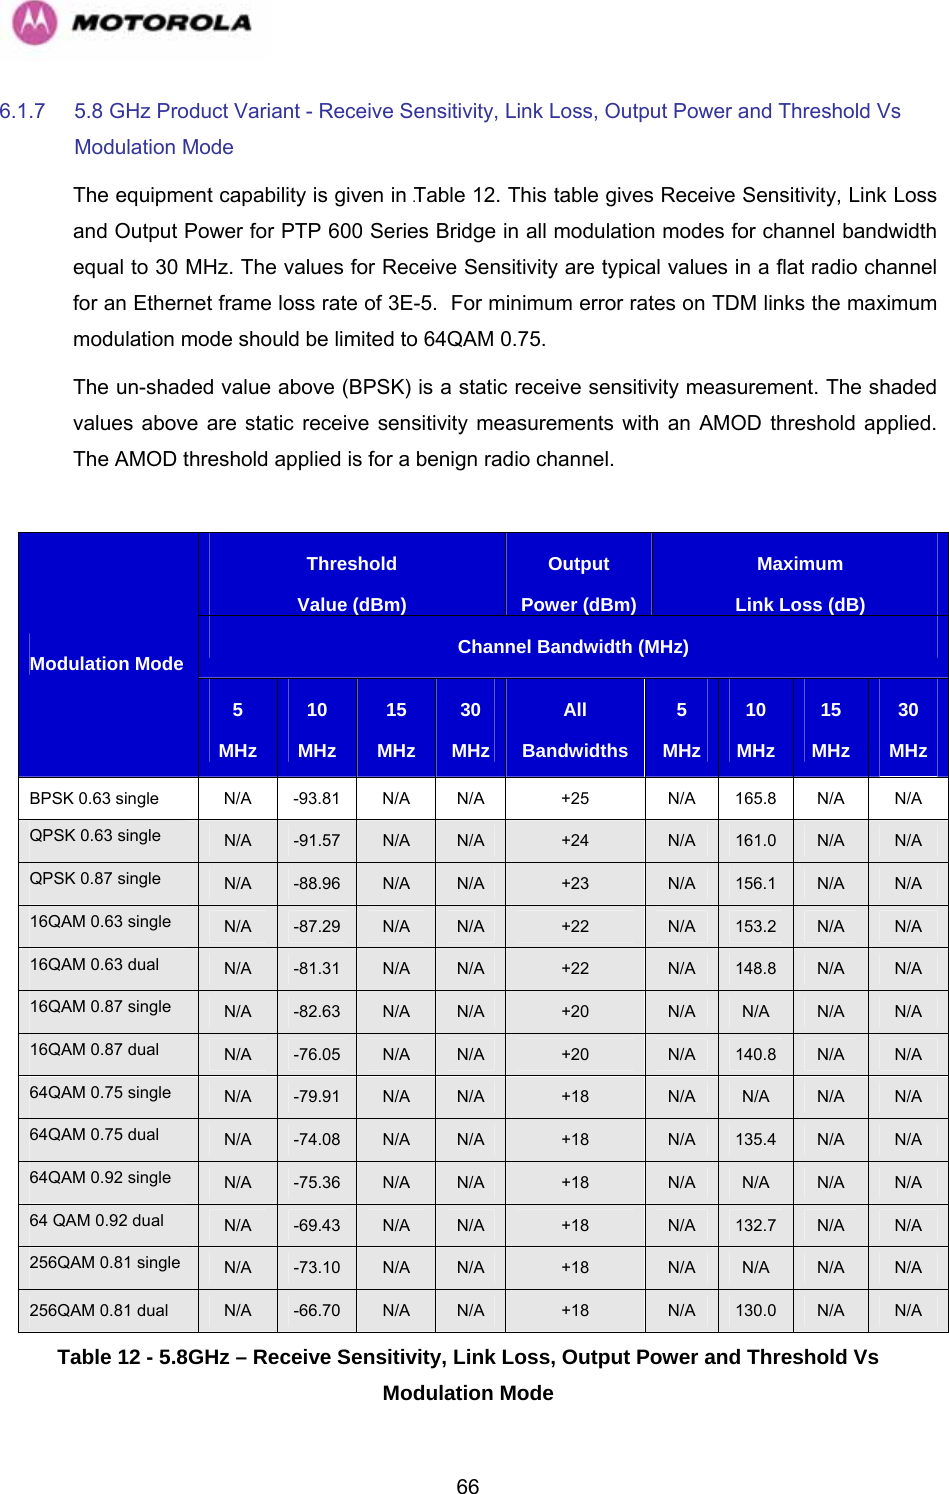   666.1.7  5.8 GHz Product Variant - Receive Sensitivity, Link Loss, Output Power and Threshold Vs Modulation Mode The equipment capability is given in 1023HTable 12. This table gives Receive Sensitivity, Link Loss and Output Power for PTP 600 Series Bridge in all modulation modes for channel bandwidth equal to 30 MHz. The values for Receive Sensitivity are typical values in a flat radio channel for an Ethernet frame loss rate of 3E-5.  For minimum error rates on TDM links the maximum modulation mode should be limited to 64QAM 0.75. The un-shaded value above (BPSK) is a static receive sensitivity measurement. The shaded values above are static receive sensitivity measurements with an AMOD threshold applied. The AMOD threshold applied is for a benign radio channel.  Threshold Value (dBm)Output Power (dBm)Maximum Link Loss (dB)Channel Bandwidth (MHz) Modulation Mode 5 MHz 10 MHz 15 MHz 30 MHz All  Bandwidths 5 MHz 10 MHz 15 MHz 30 MHz BPSK 0.63 single  N/A  -93.81  N/A  N/A  +25  N/A  165.8  N/A  N/A QPSK 0.63 single  N/A  -91.57  N/A  N/A  +24  N/A  161.0  N/A  N/A QPSK 0.87 single  N/A  -88.96  N/A  N/A  +23  N/A  156.1  N/A  N/A 16QAM 0.63 single  N/A  -87.29  N/A  N/A  +22  N/A  153.2  N/A  N/A 16QAM 0.63 dual  N/A  -81.31  N/A  N/A  +22  N/A  148.8  N/A  N/A 16QAM 0.87 single  N/A  -82.63  N/A  N/A  +20  N/A  N/A  N/A  N/A 16QAM 0.87 dual  N/A  -76.05  N/A  N/A  +20  N/A  140.8  N/A  N/A 64QAM 0.75 single  N/A  -79.91  N/A  N/A  +18  N/A  N/A  N/A  N/A 64QAM 0.75 dual  N/A  -74.08  N/A  N/A  +18  N/A  135.4  N/A  N/A 64QAM 0.92 single  N/A  -75.36  N/A  N/A  +18  N/A  N/A  N/A  N/A 64 QAM 0.92 dual  N/A  -69.43  N/A  N/A  +18  N/A  132.7  N/A  N/A 256QAM 0.81 single  N/A  -73.10  N/A  N/A  +18  N/A  N/A  N/A  N/A 256QAM 0.81 dual  N/A  -66.70  N/A  N/A  +18  N/A  130.0  N/A  N/A Table 12 - 5.8GHz – Receive Sensitivity, Link Loss, Output Power and Threshold Vs Modulation Mode